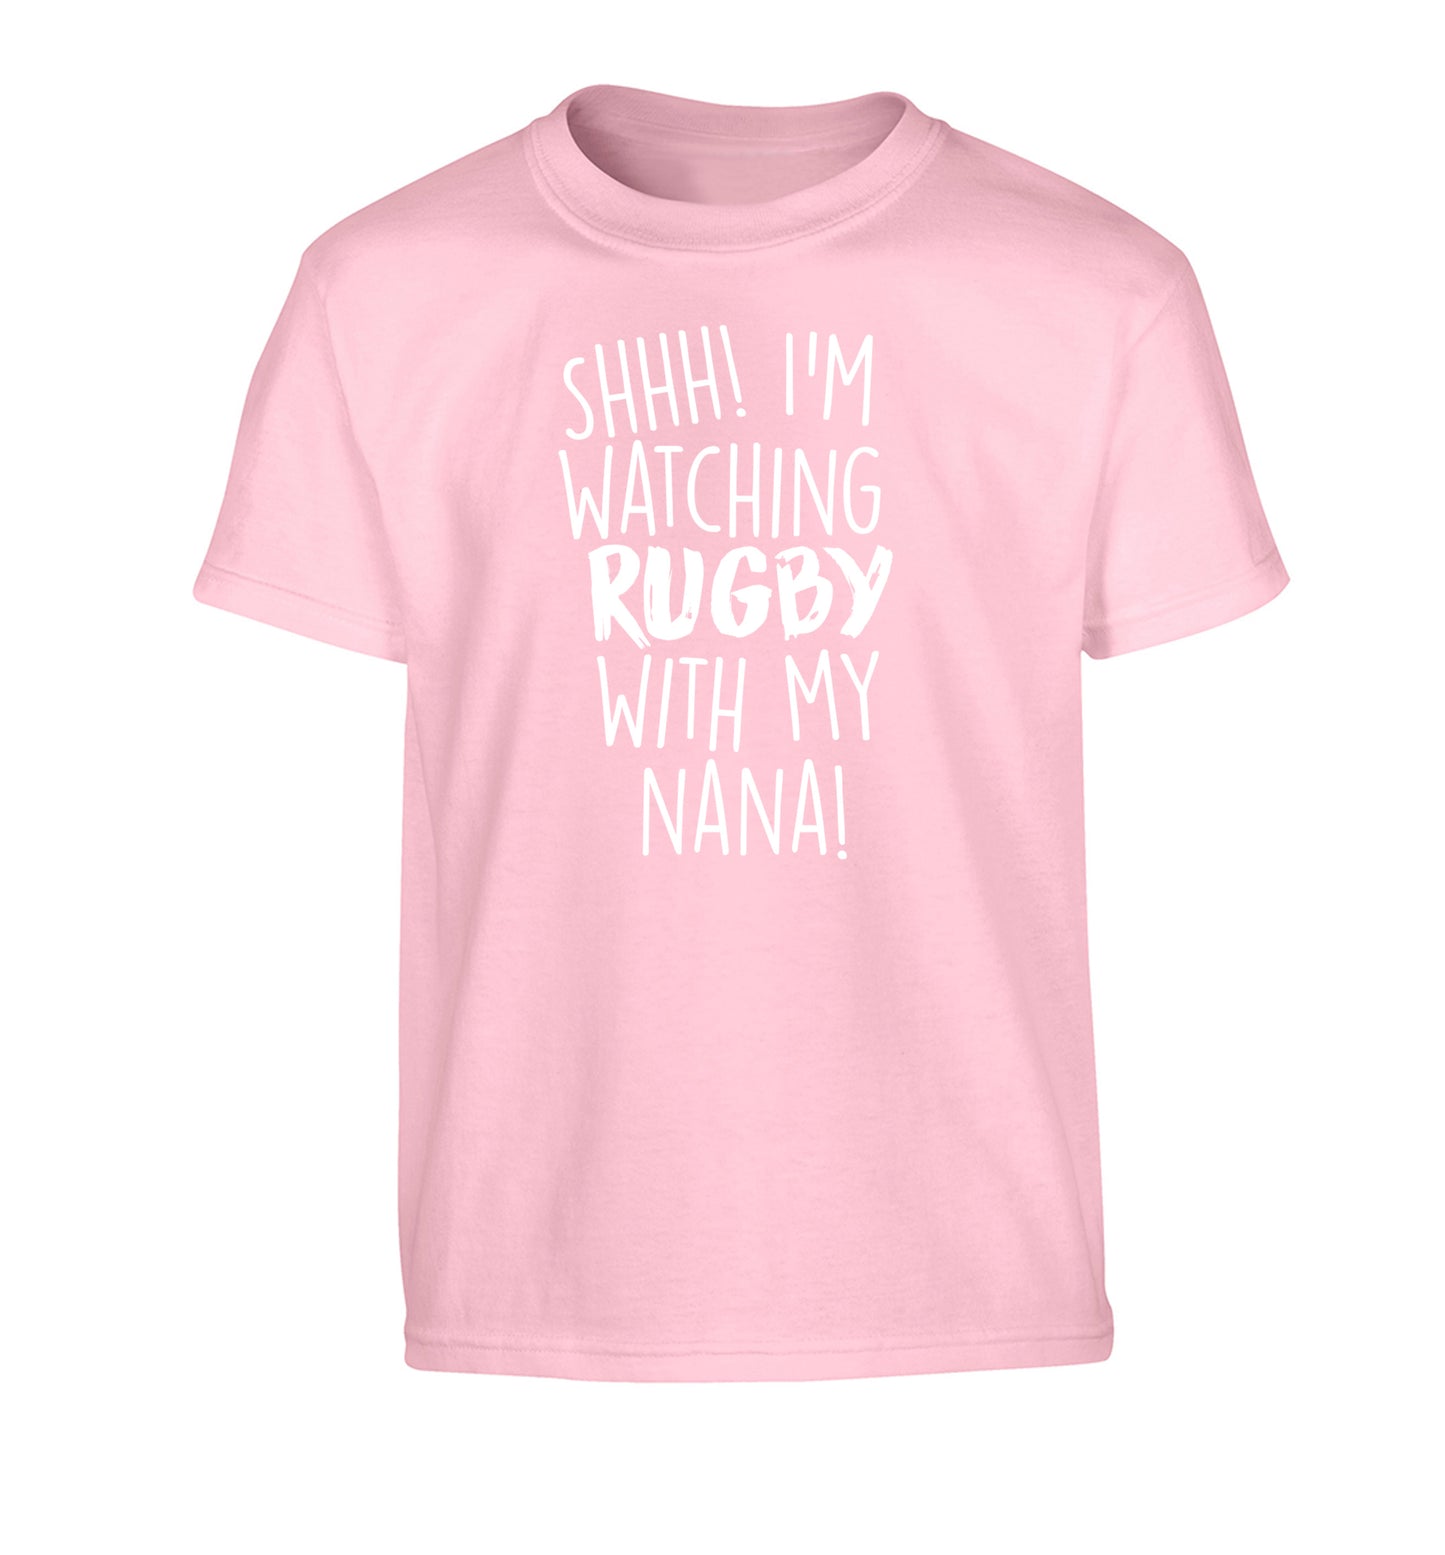 Shh I'm watching rugby with my nana Children's light pink Tshirt 12-13 Years